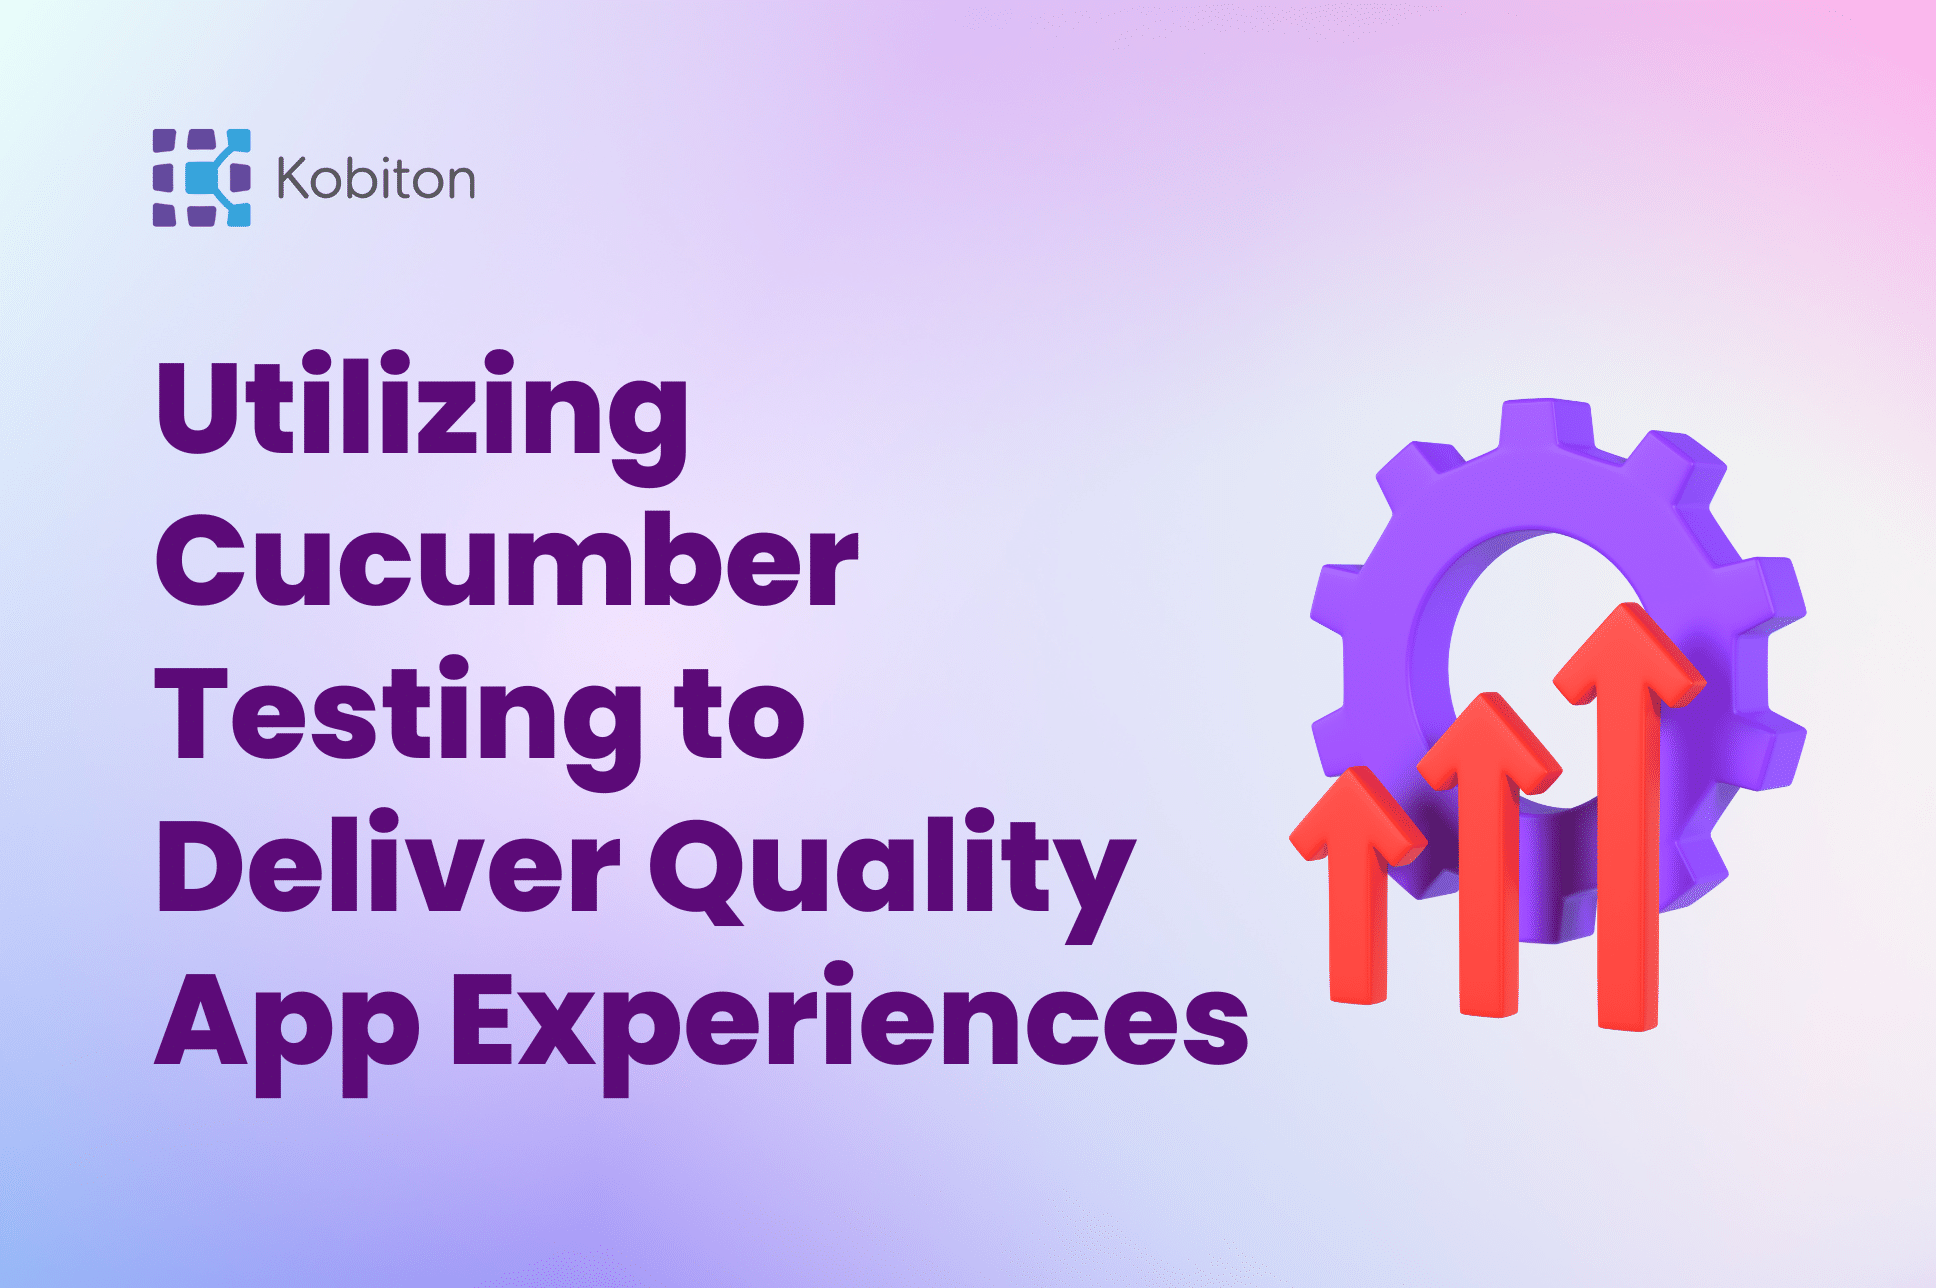 Utilizing Cucumber Testing to Deliver Quality App Experiences